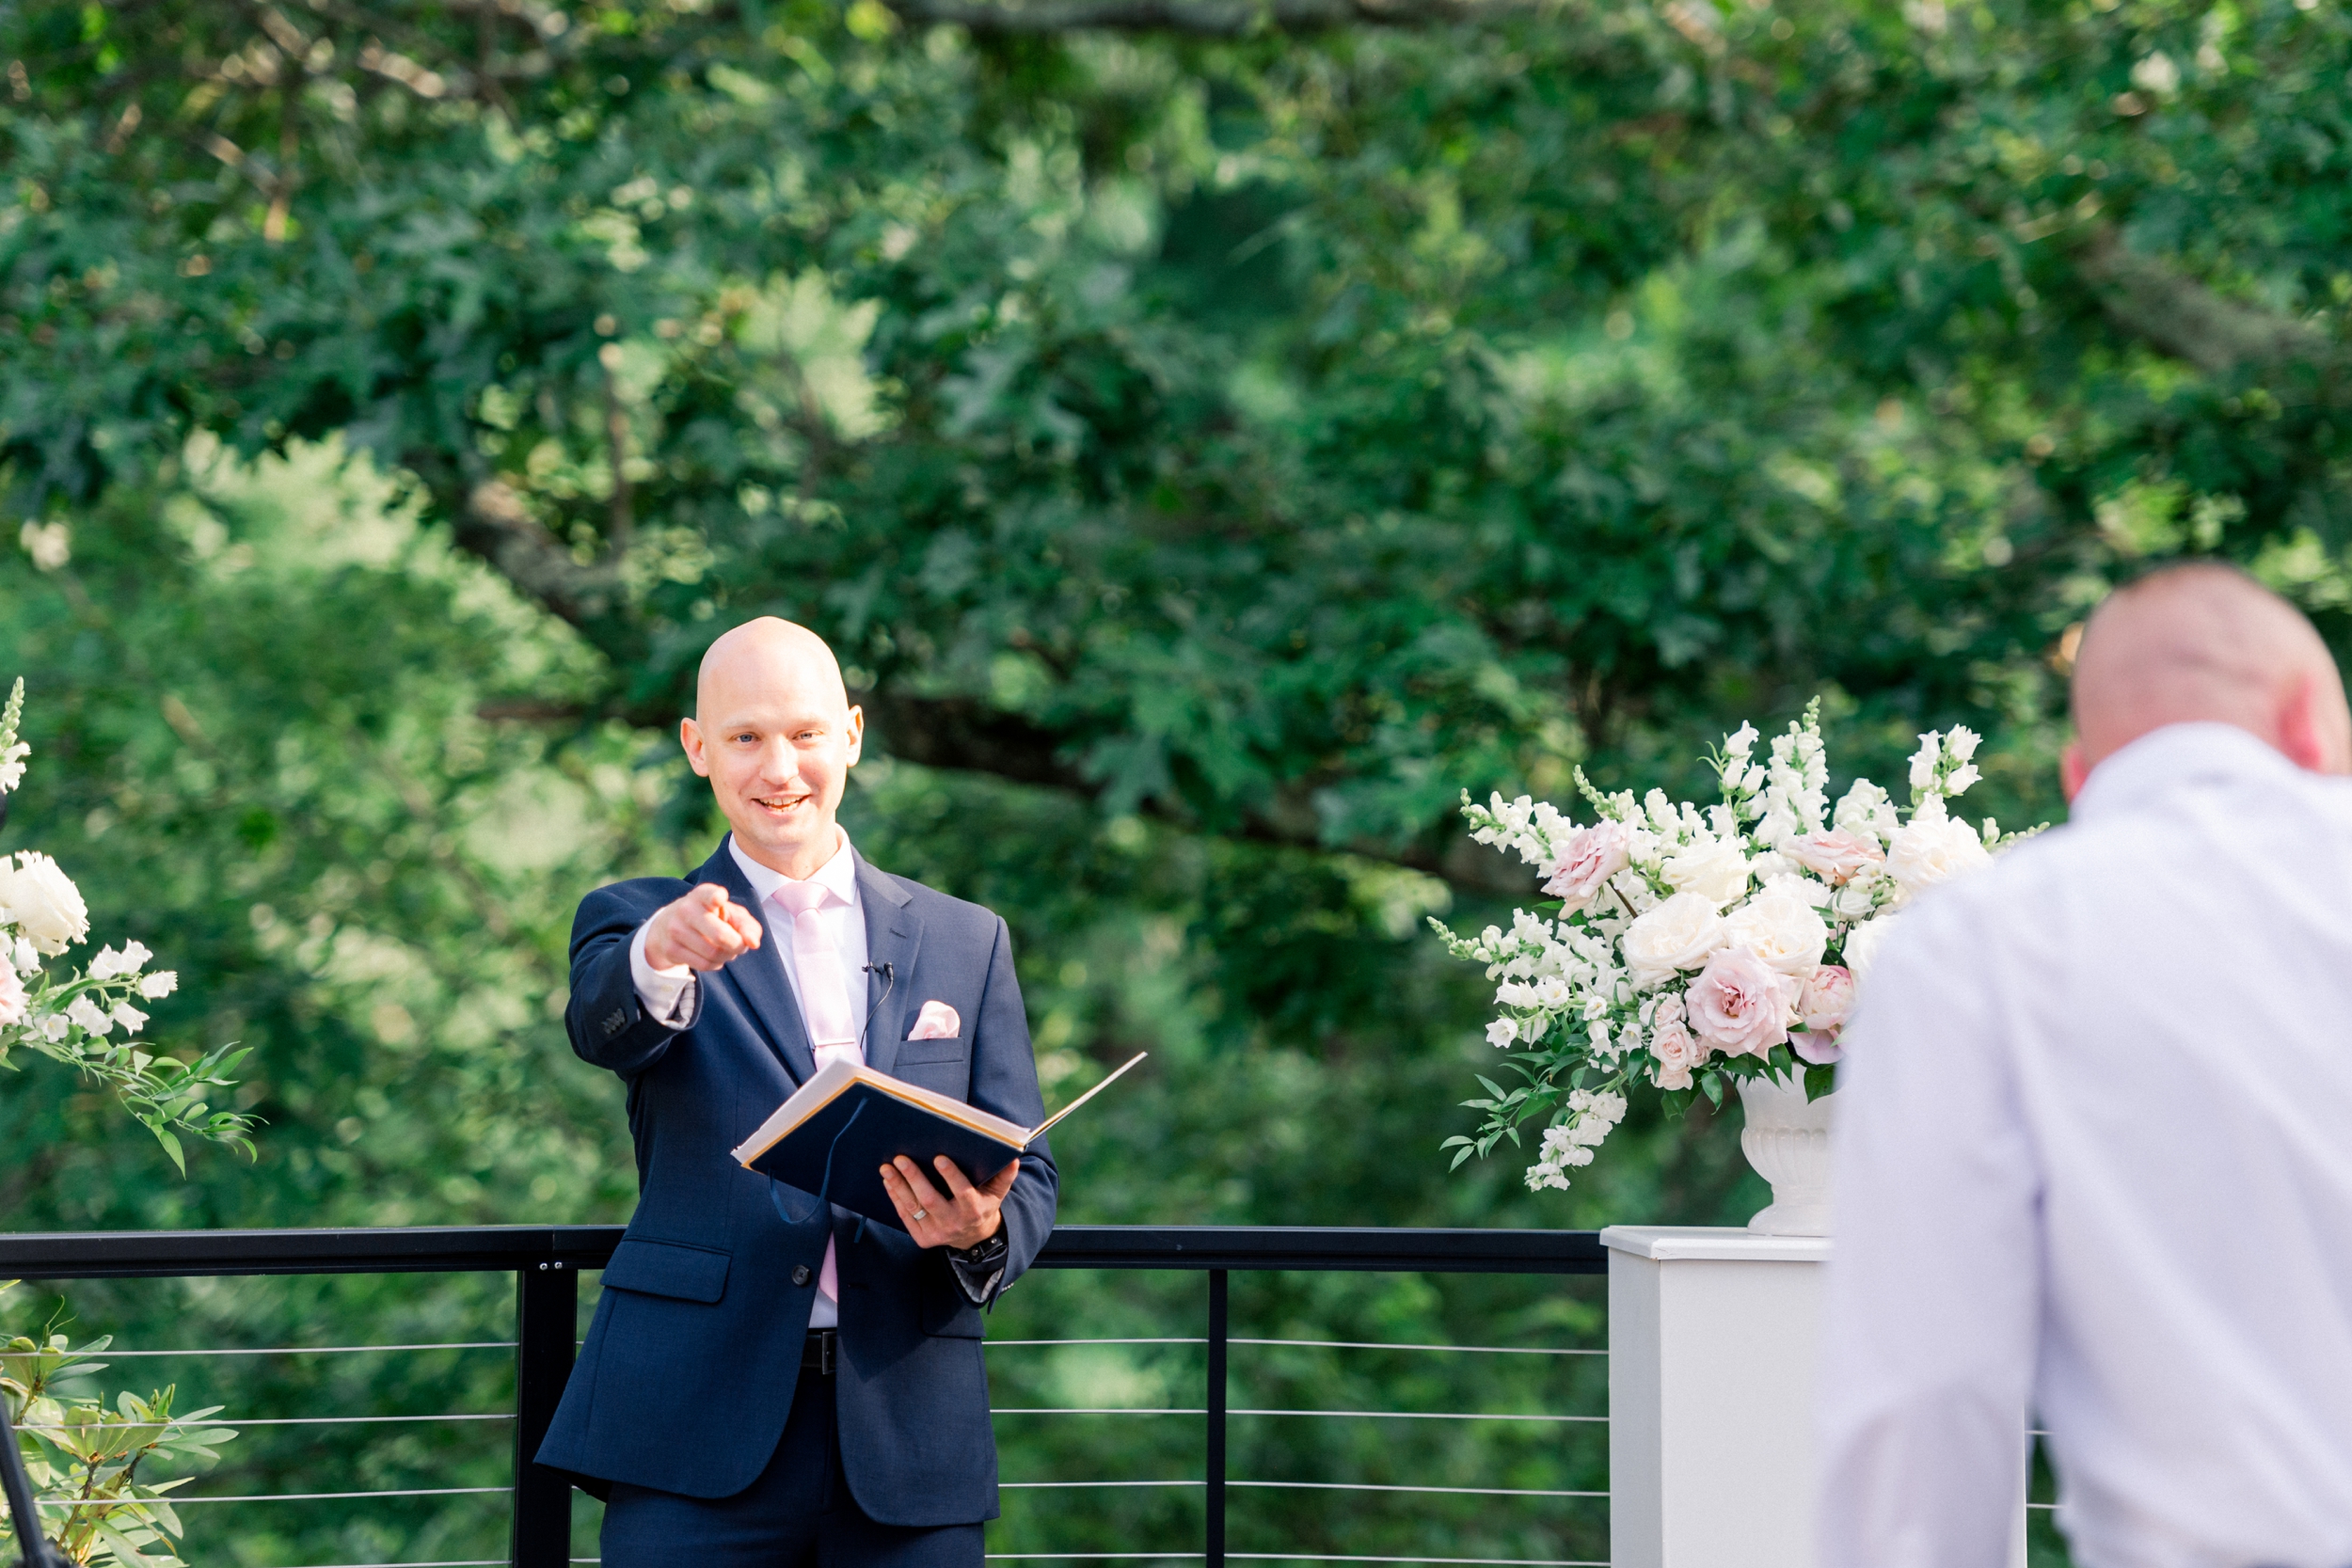 brother of groom officiating outdoor wedding ceremony